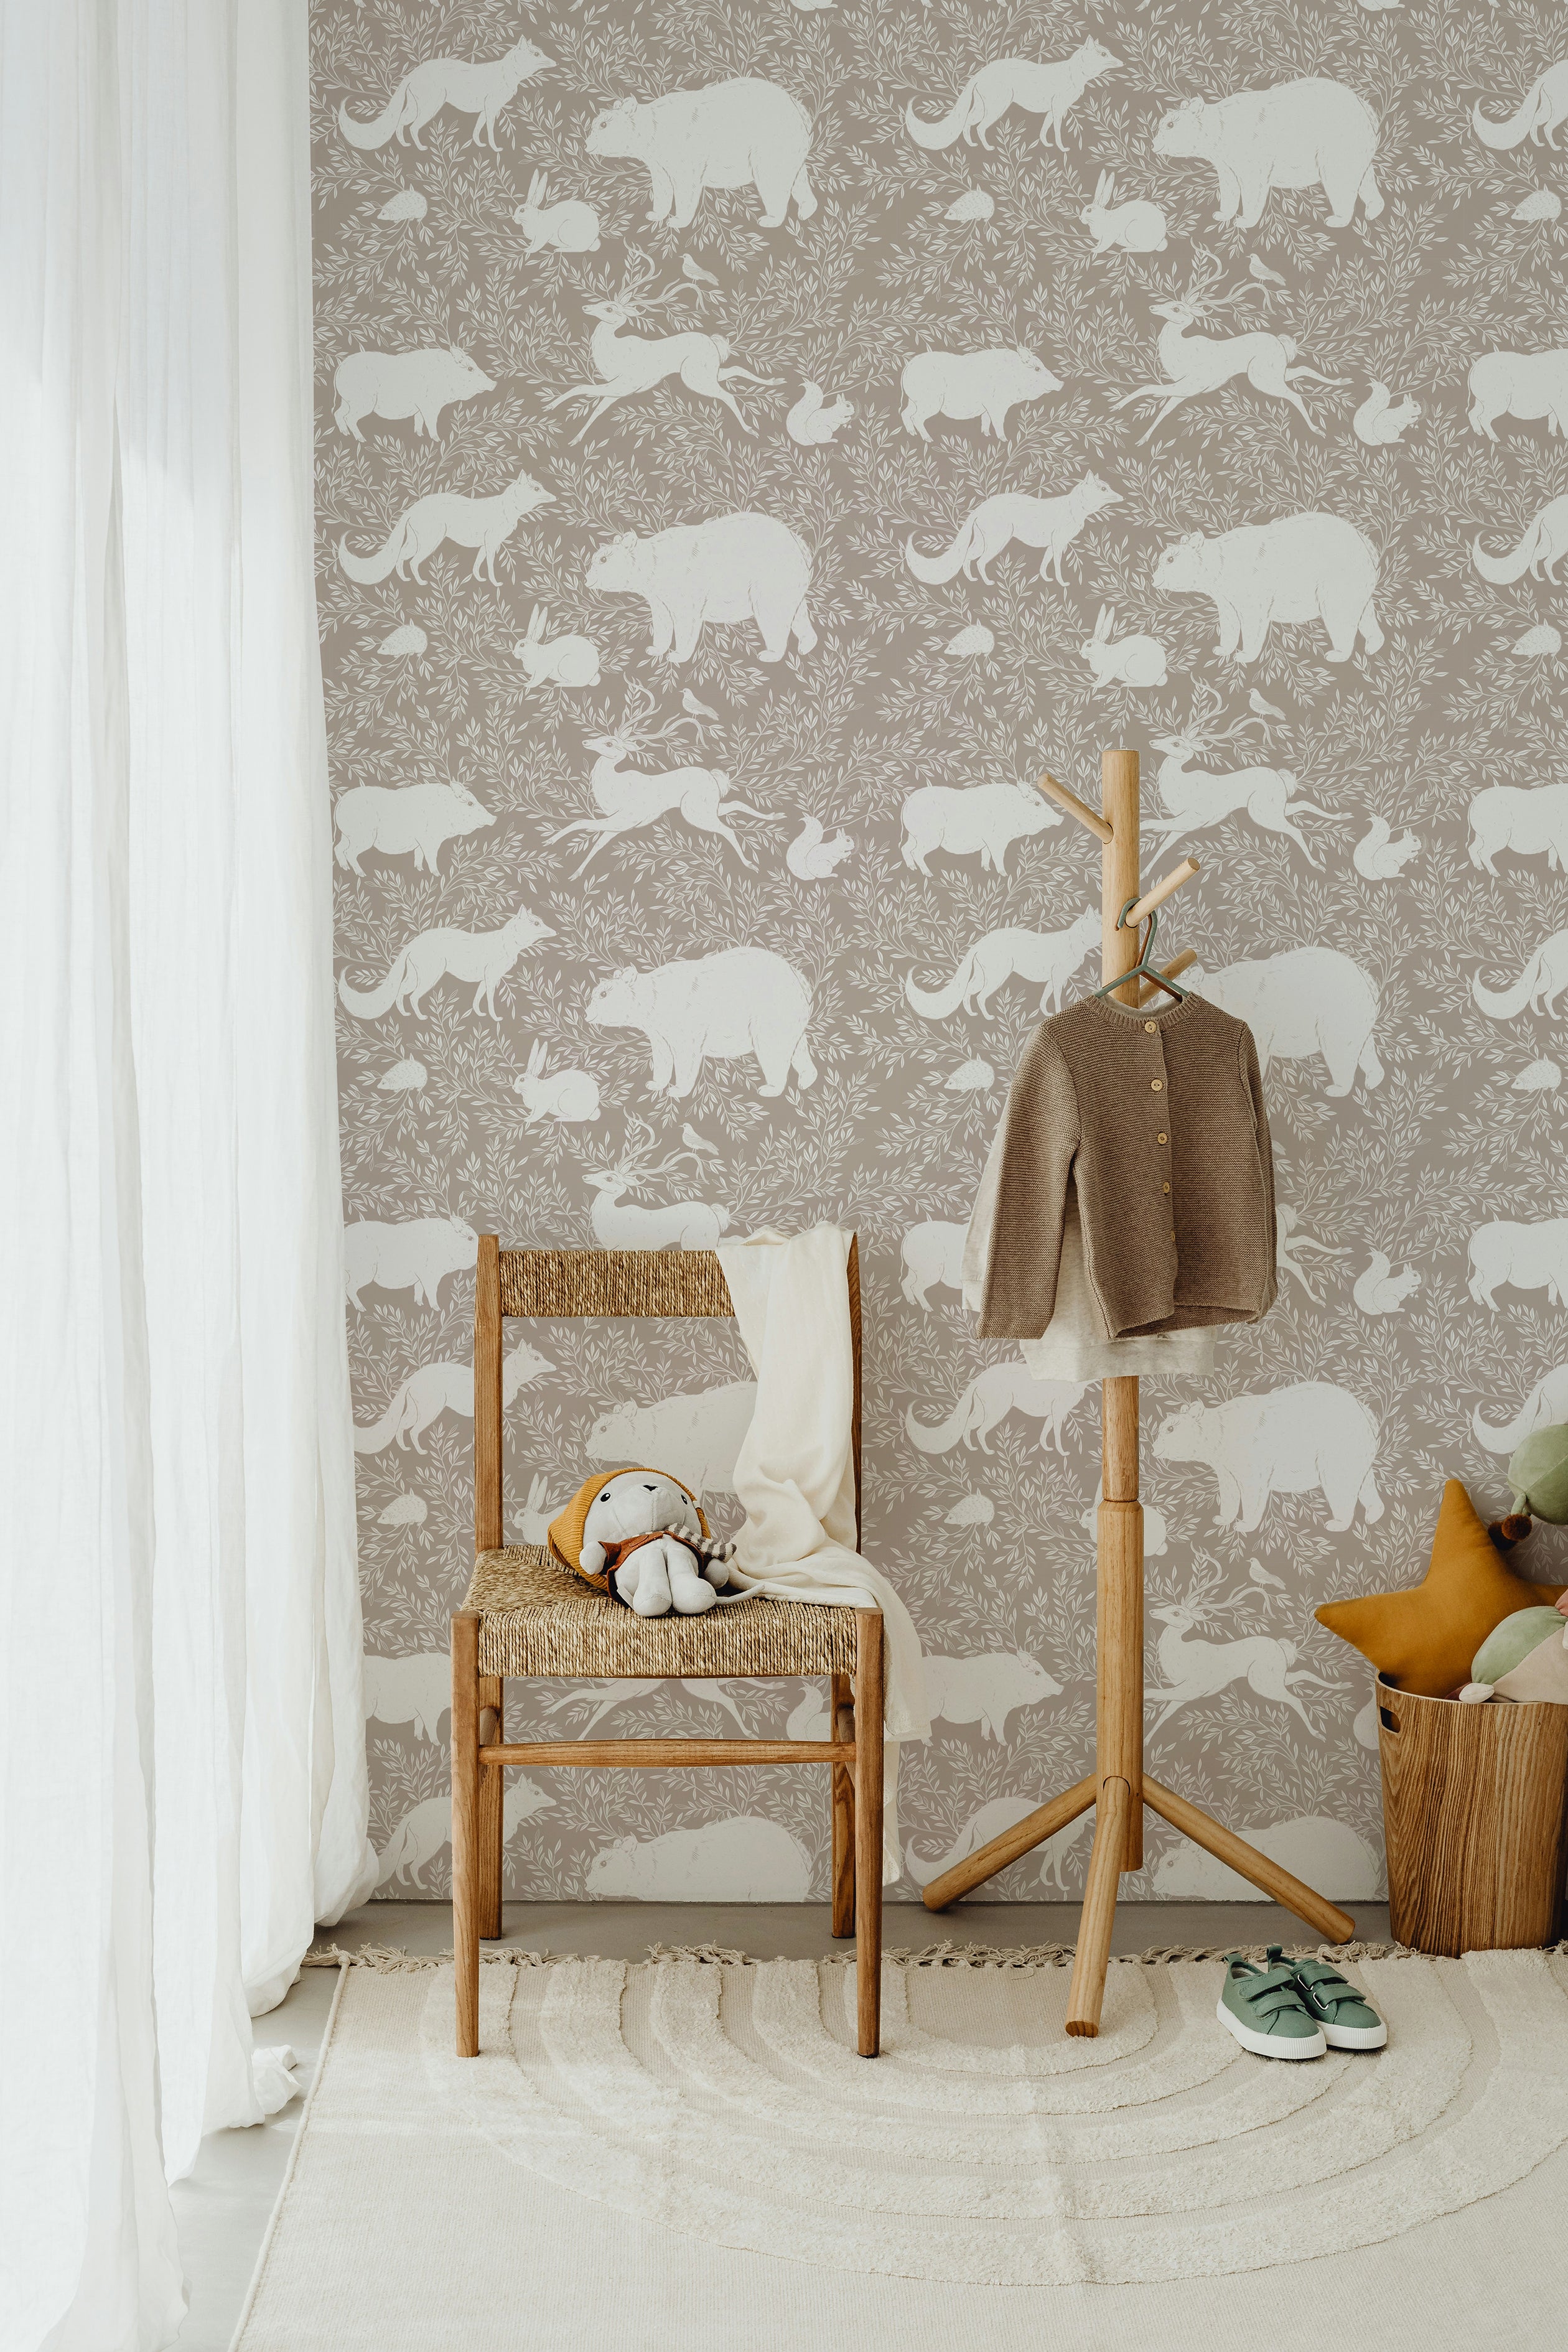 A cozy room with a wooden chair, soft toys, and a hanging coat in front of a beige wallpaper featuring white woodland animals such as bears, foxes, and rabbits, creating a serene and natural atmosphere.